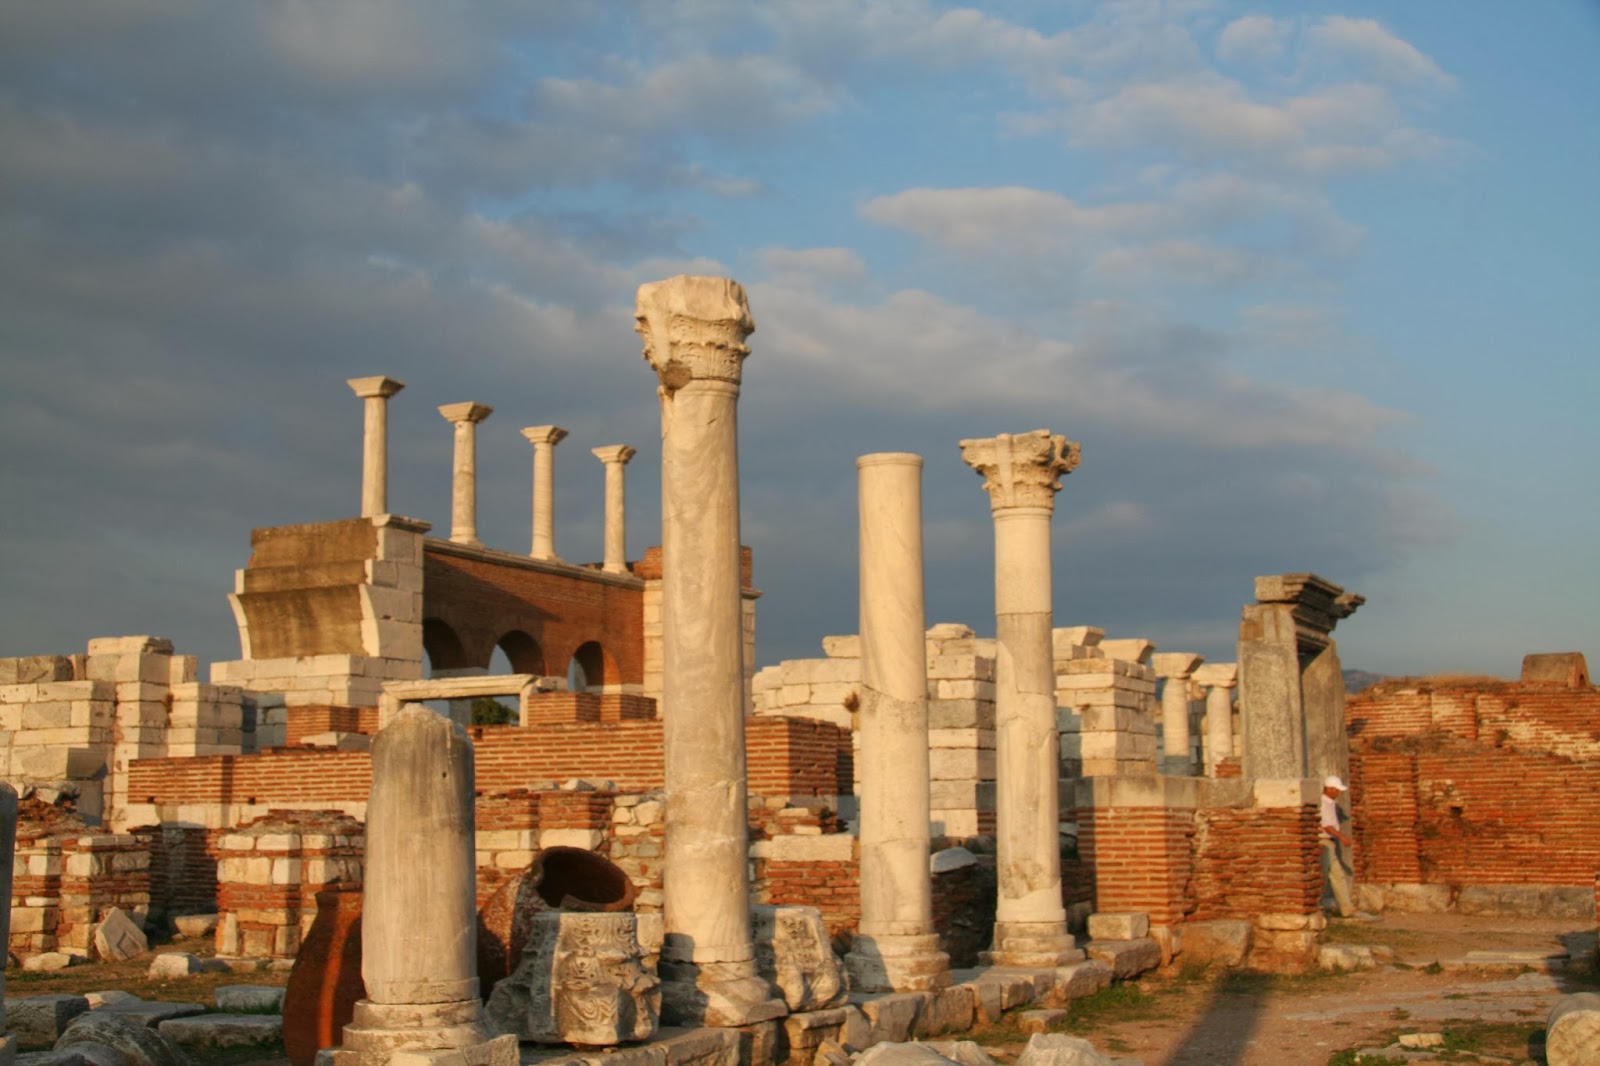 Temple Of Artemis Backgrounds on Wallpapers Vista